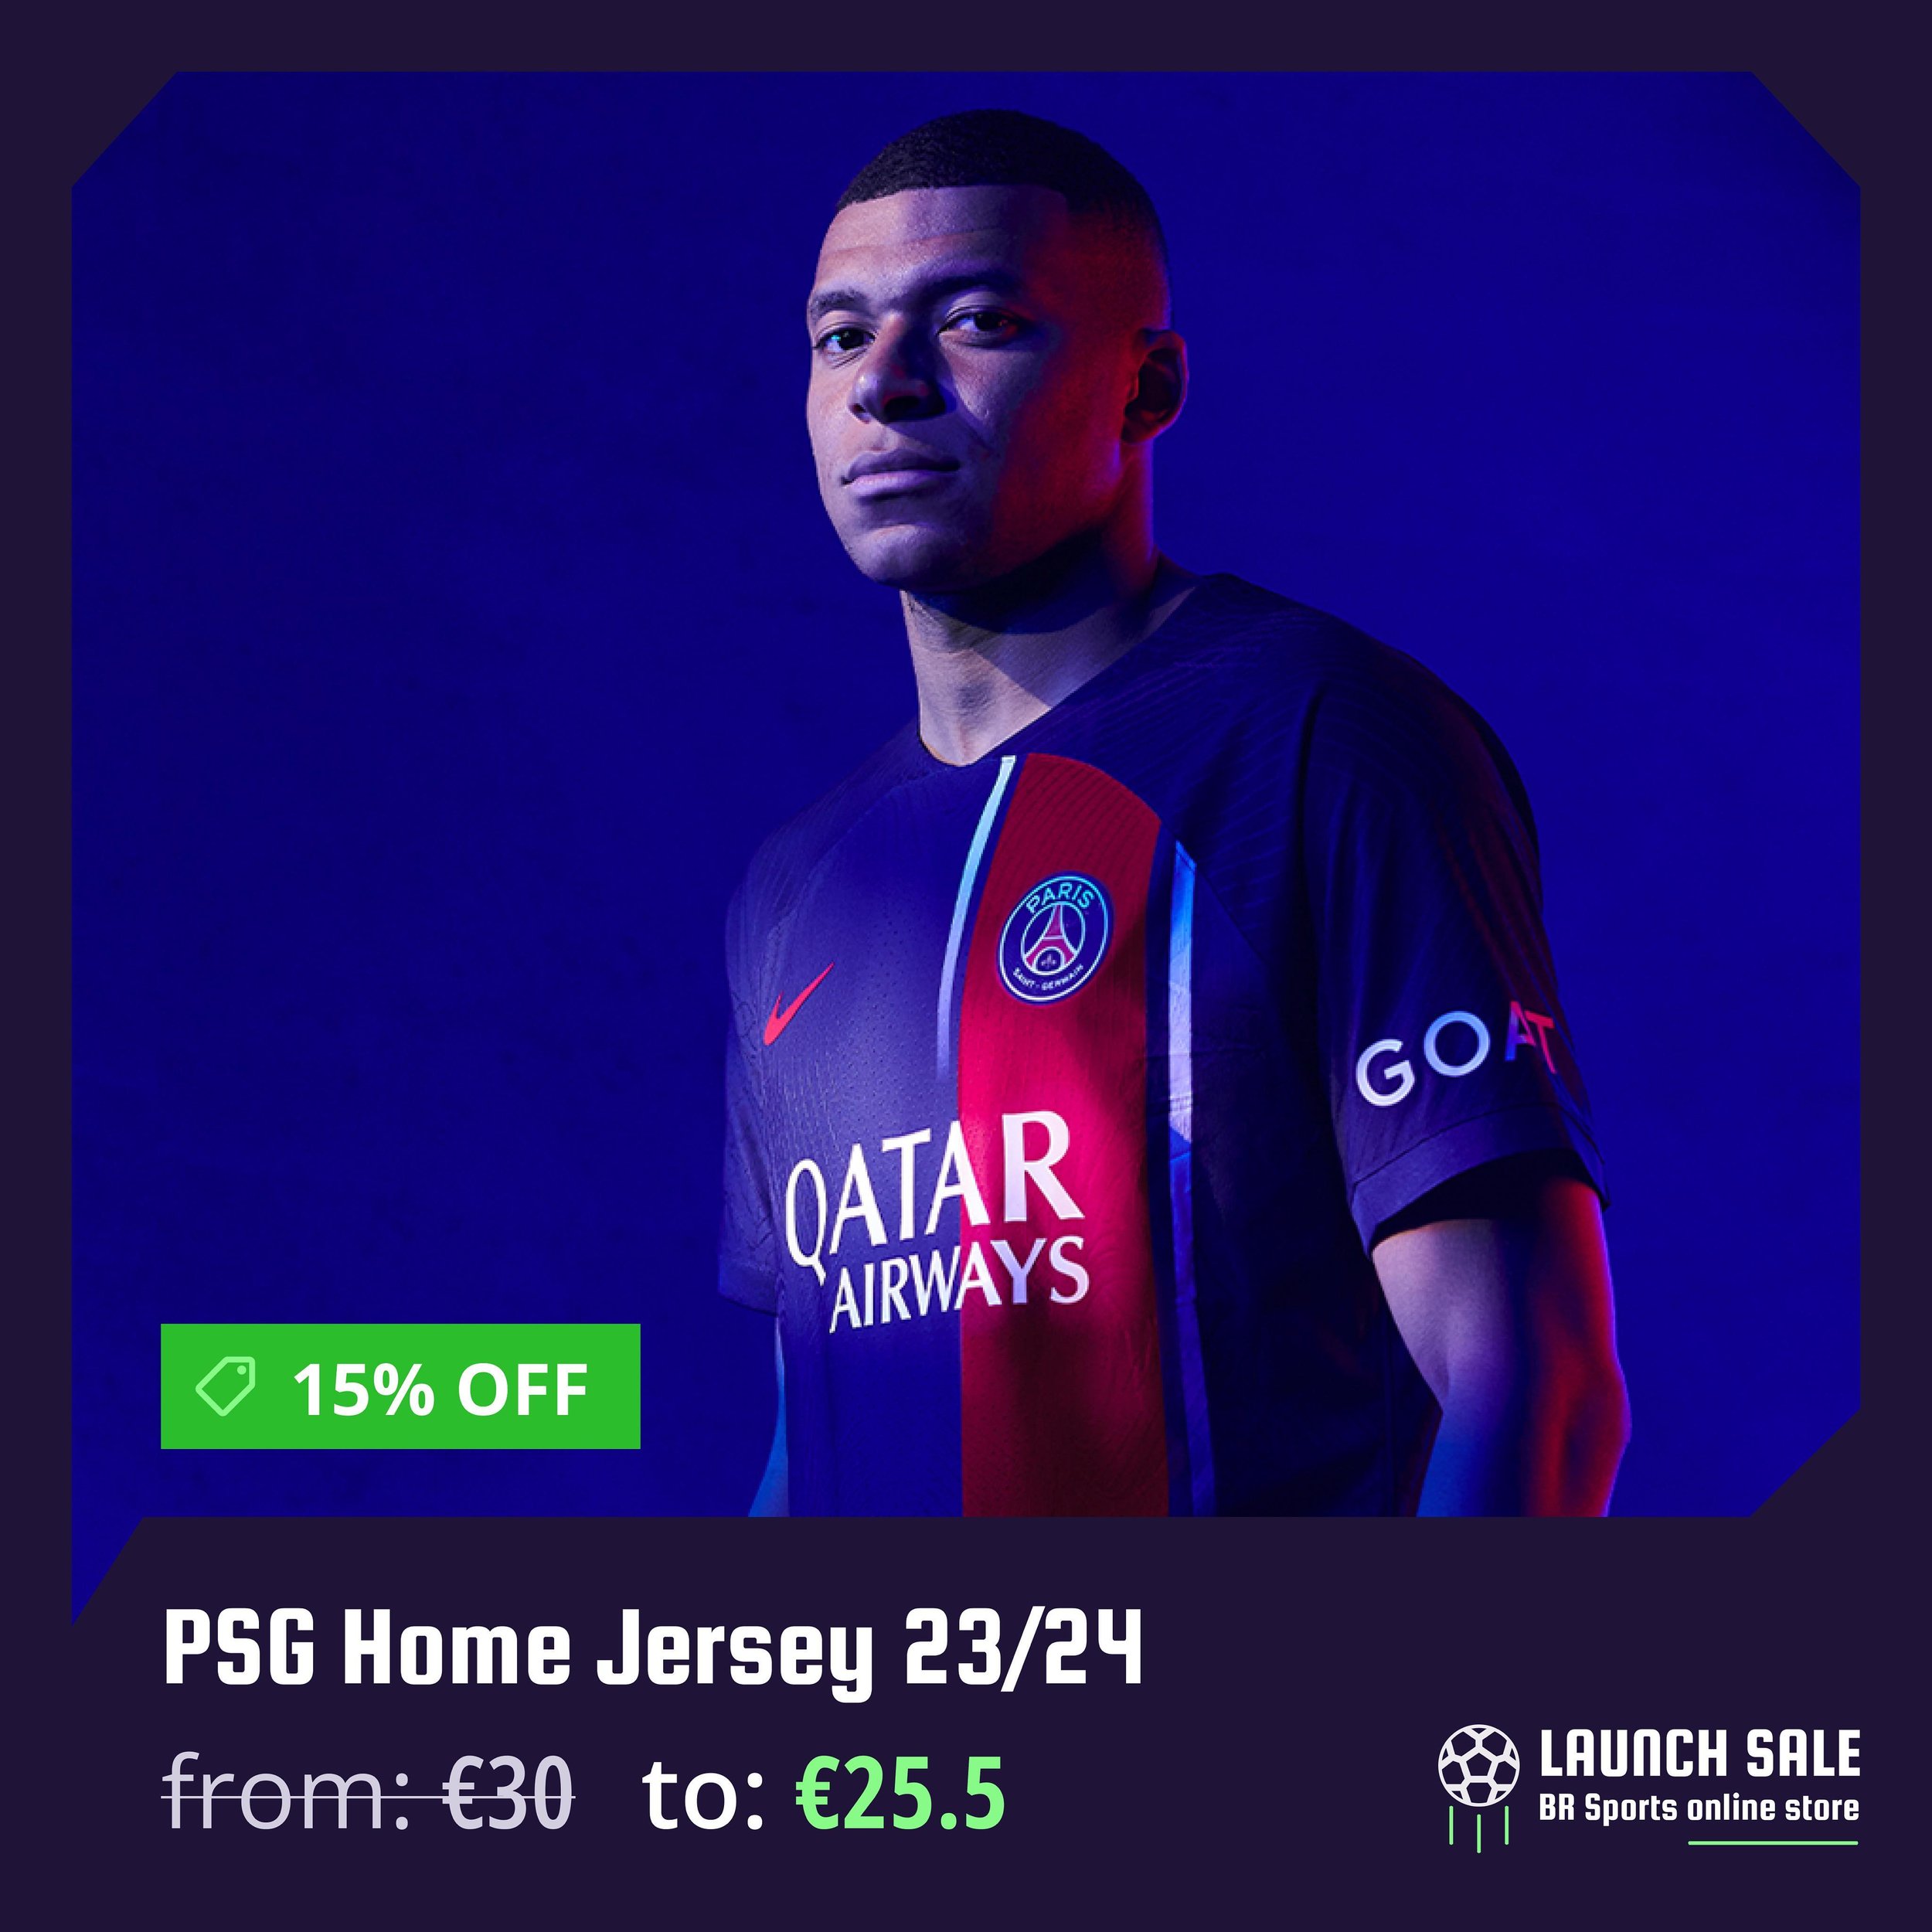 🚀 Launch Sale BR Sports online store

Enjoy 15% OFF on PSG Home 2023/24 jersey
from: &euro;30 - to: &euro;25.5

✍️ Customization: &euro;10
📦 Delivery: &euro;6.9

Click the link in the bio and wear your football love!

*The discount will be applied 